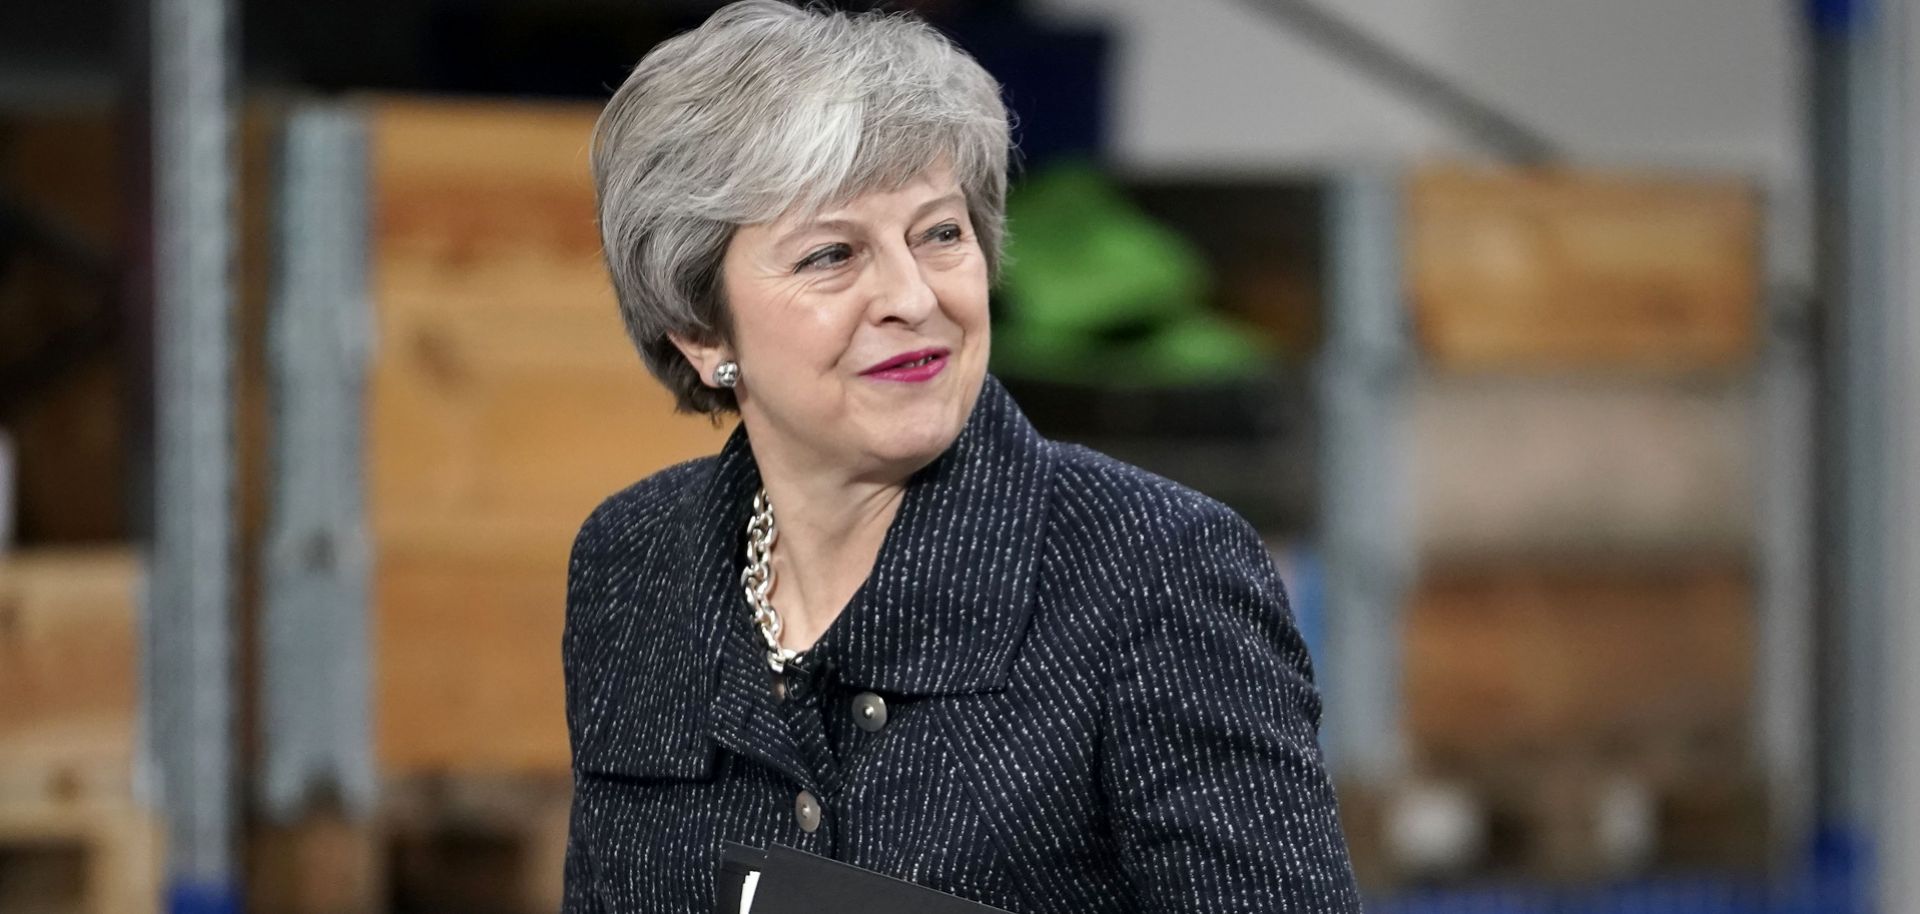 Even if the British Parliament again rejects her government's Brexit plan, Prime Minister Theresa May could delay a further vote until closer to the March 29 deadline.